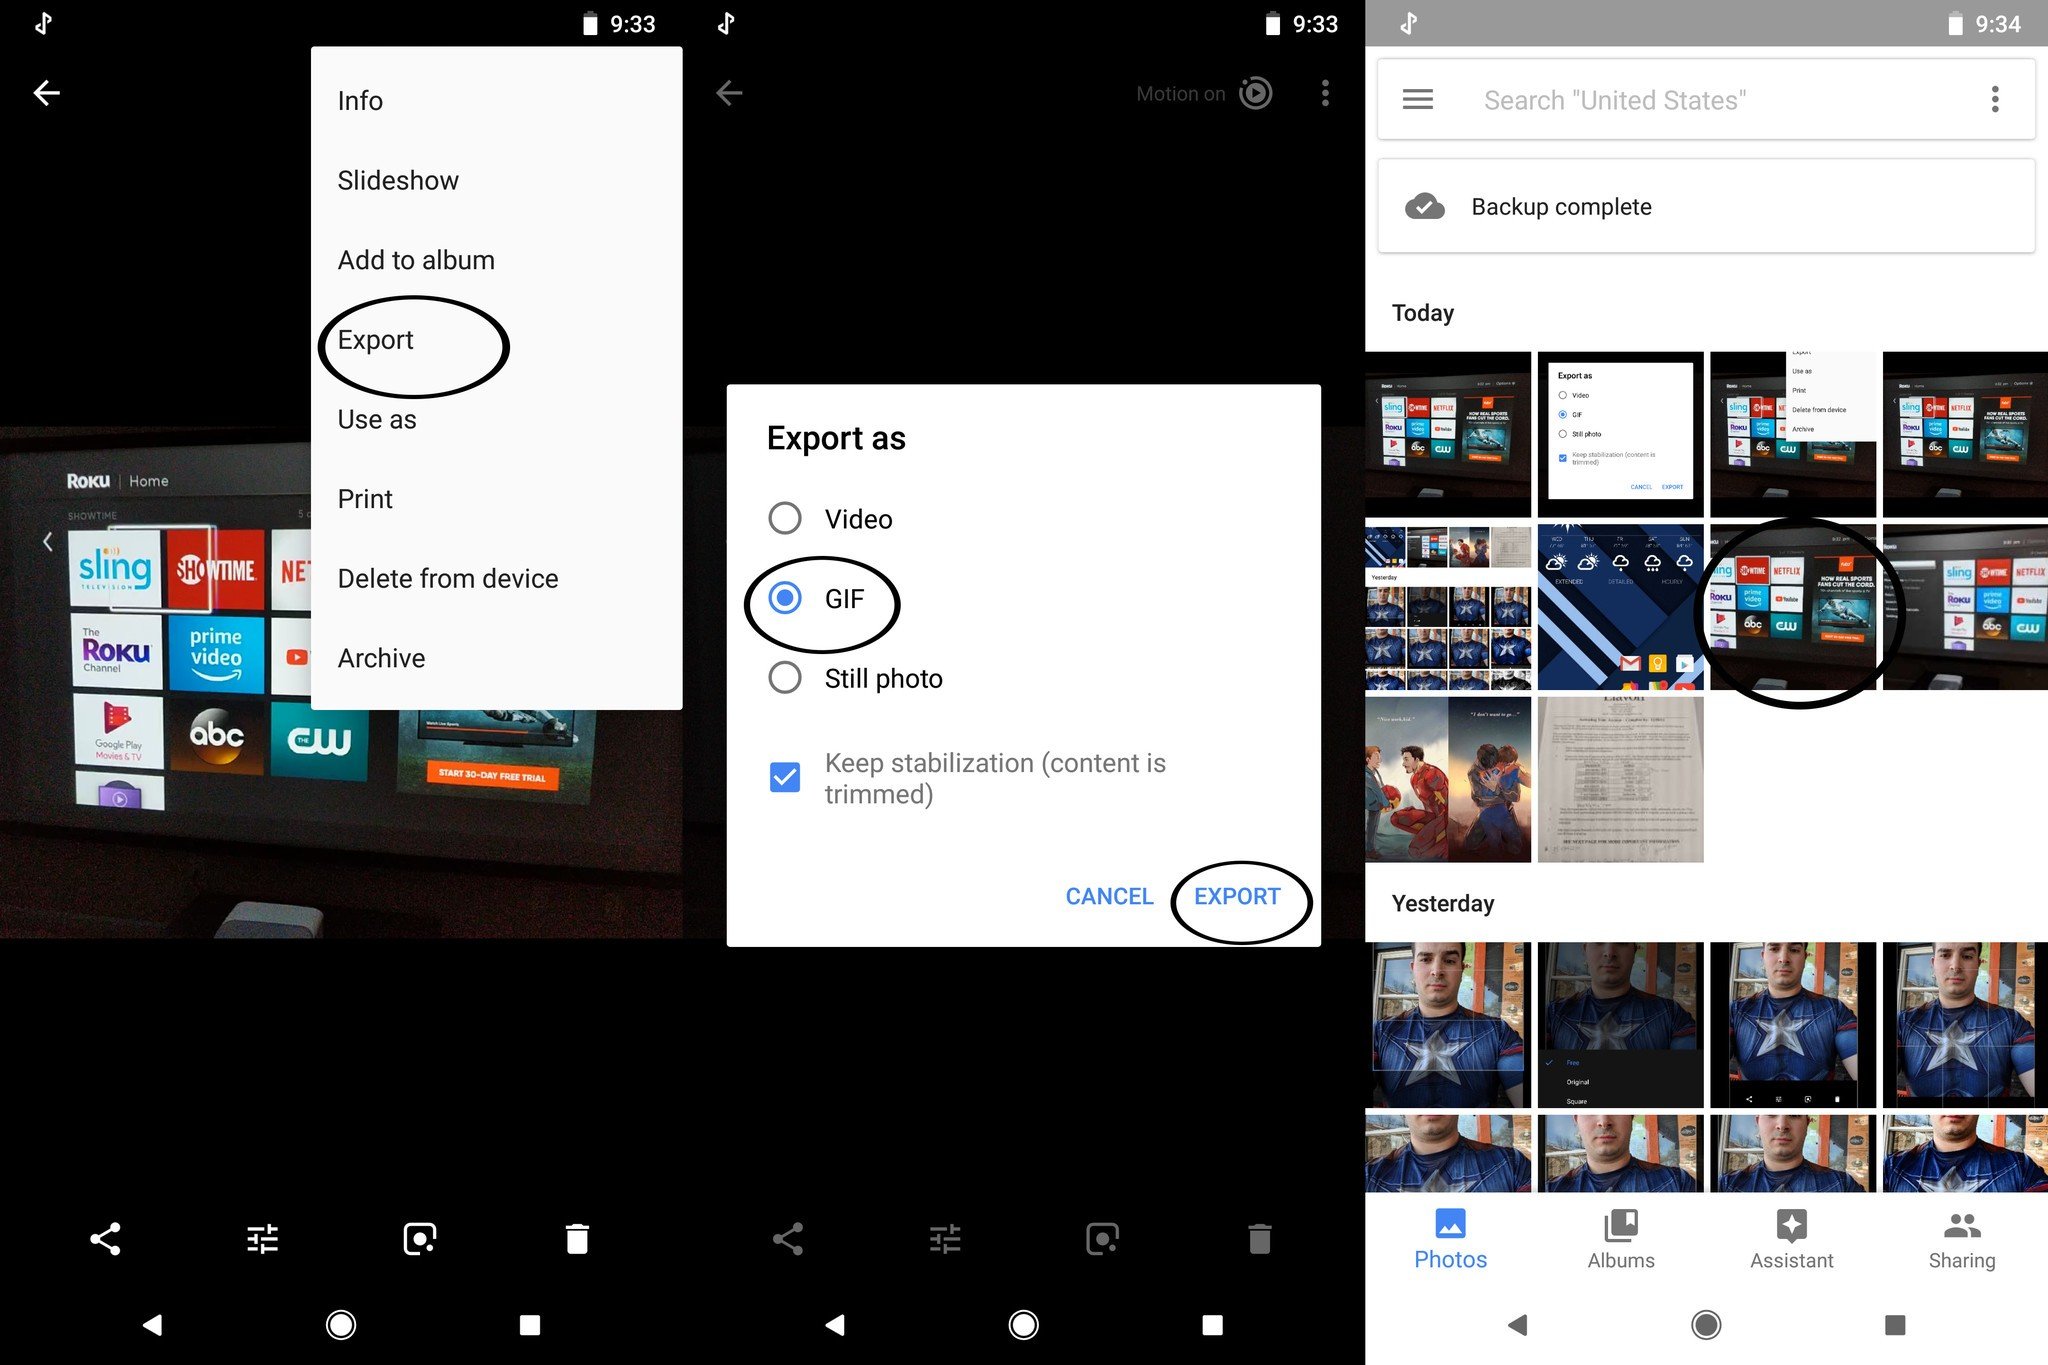 How To Export A Gif From A Motion Photo In Google Photos Android